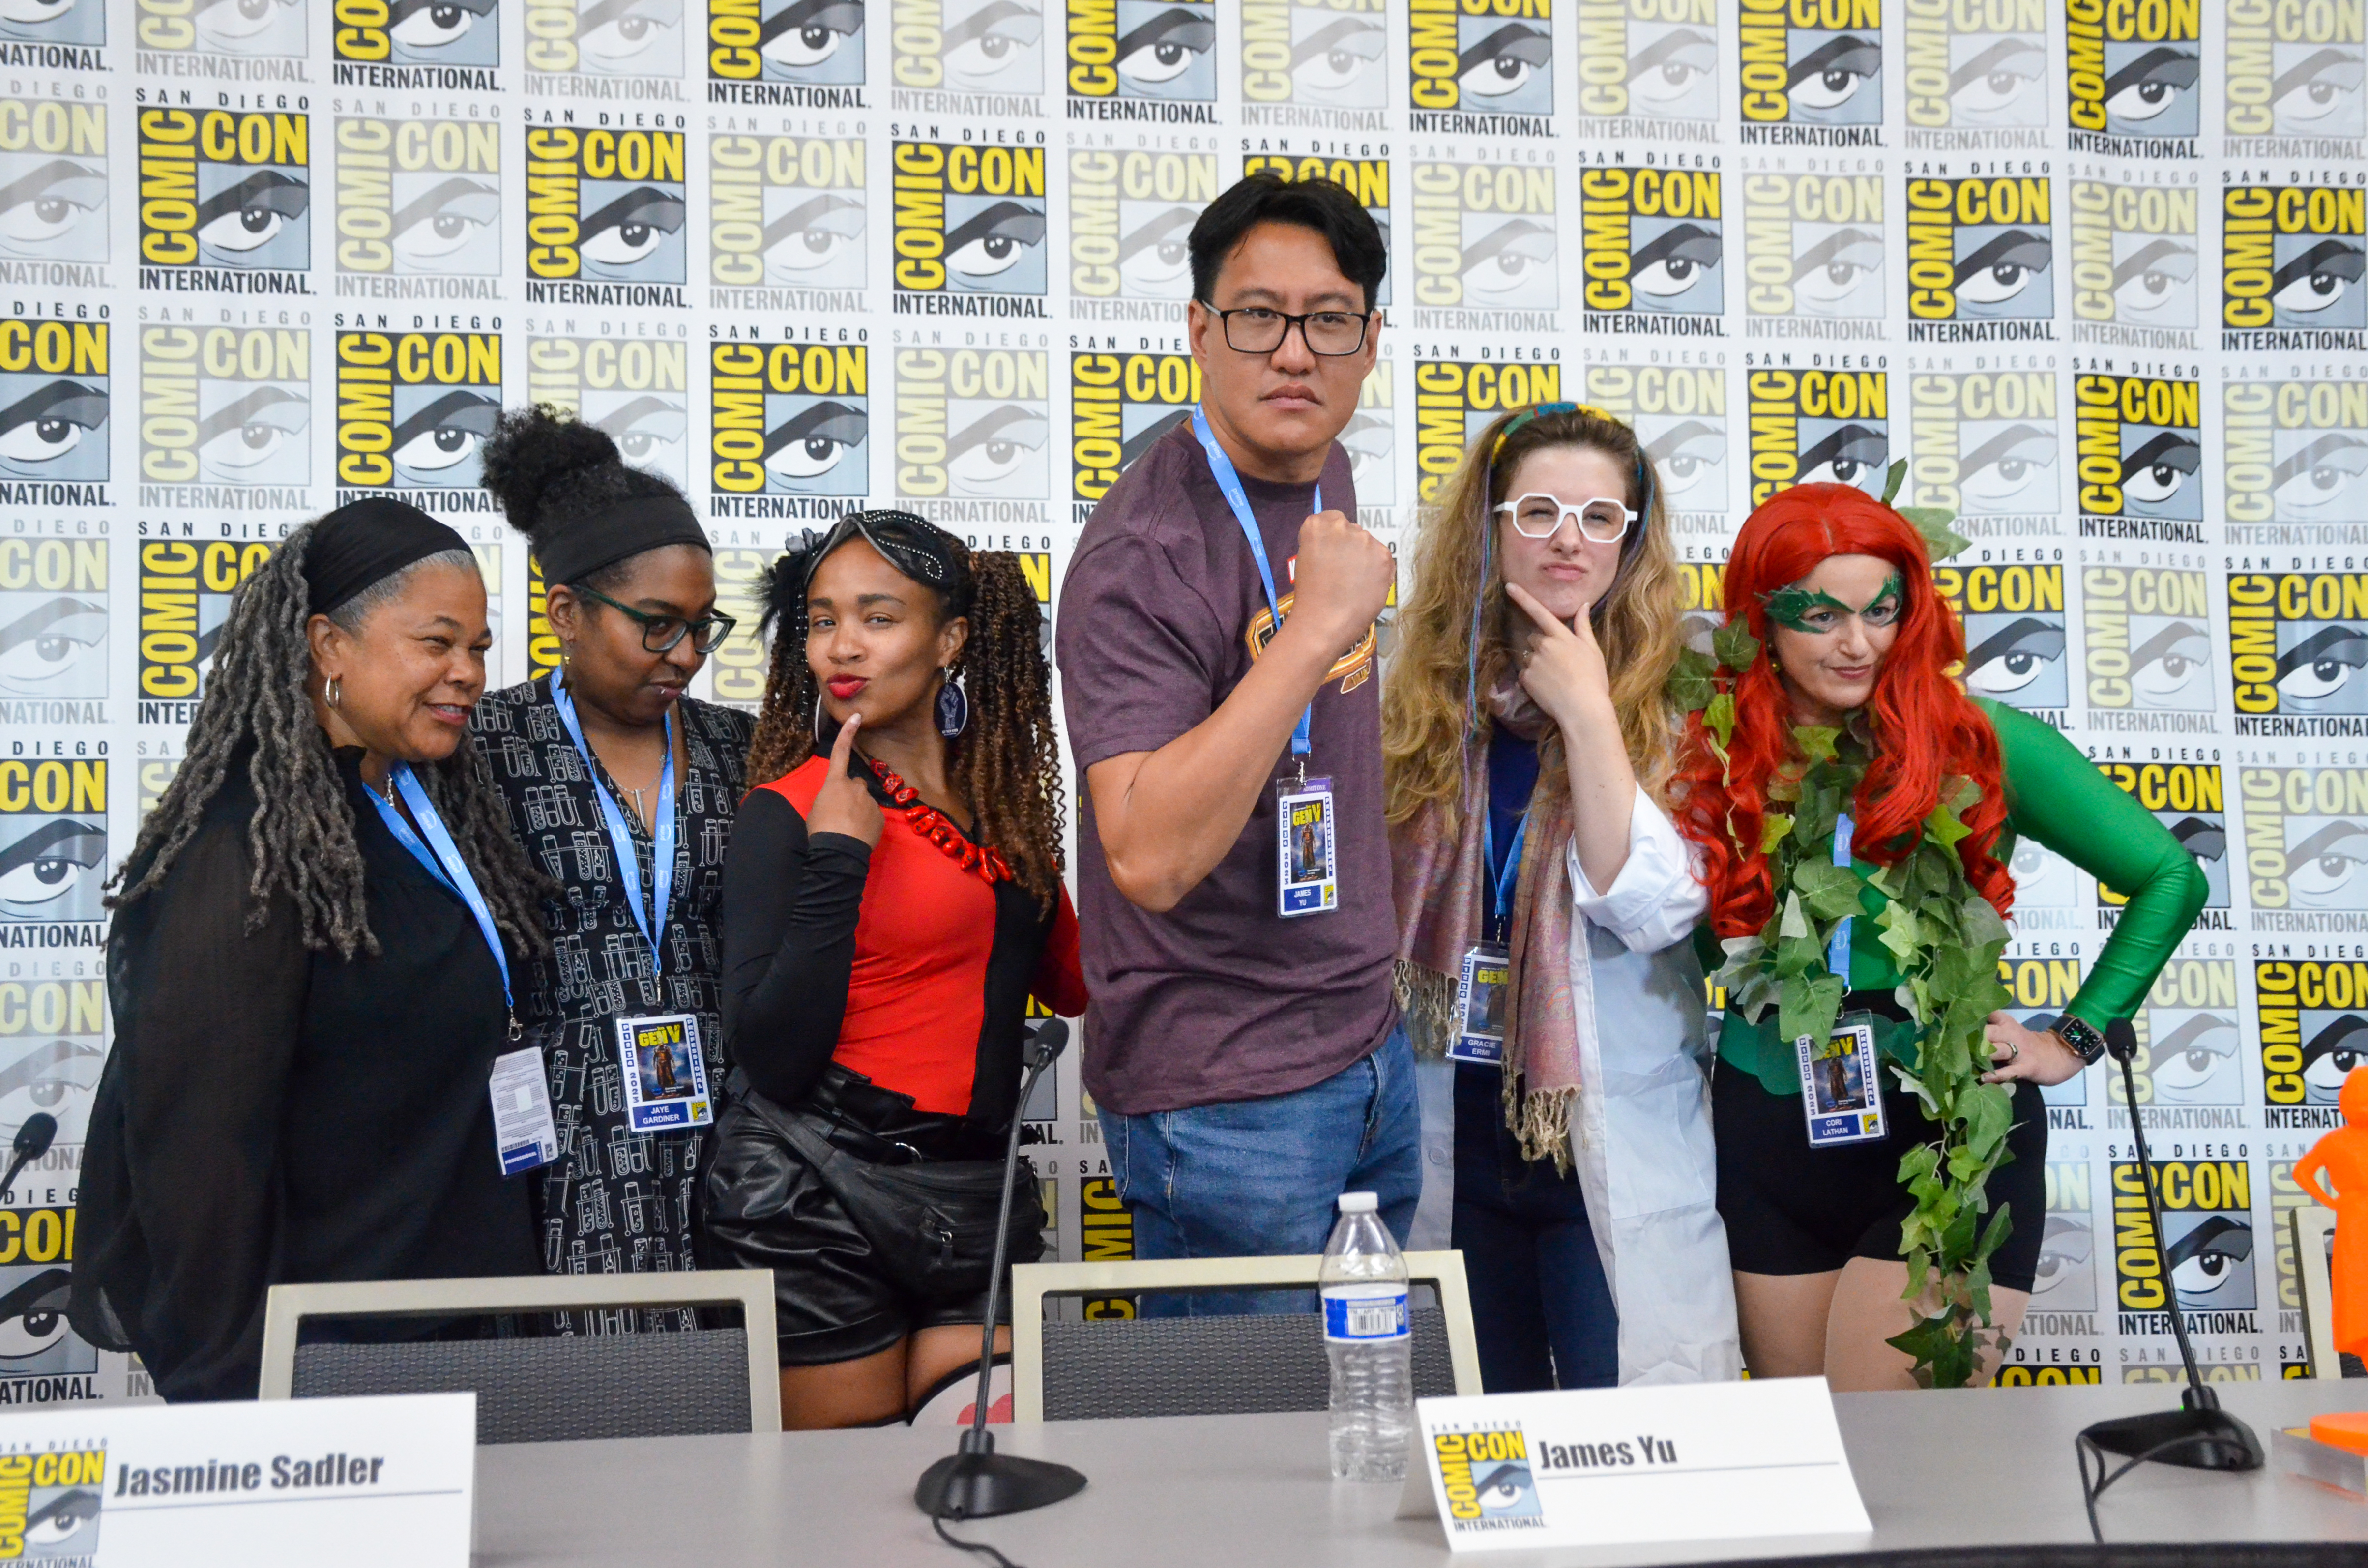 Group of six people stand together with a Comic-Con backdrop